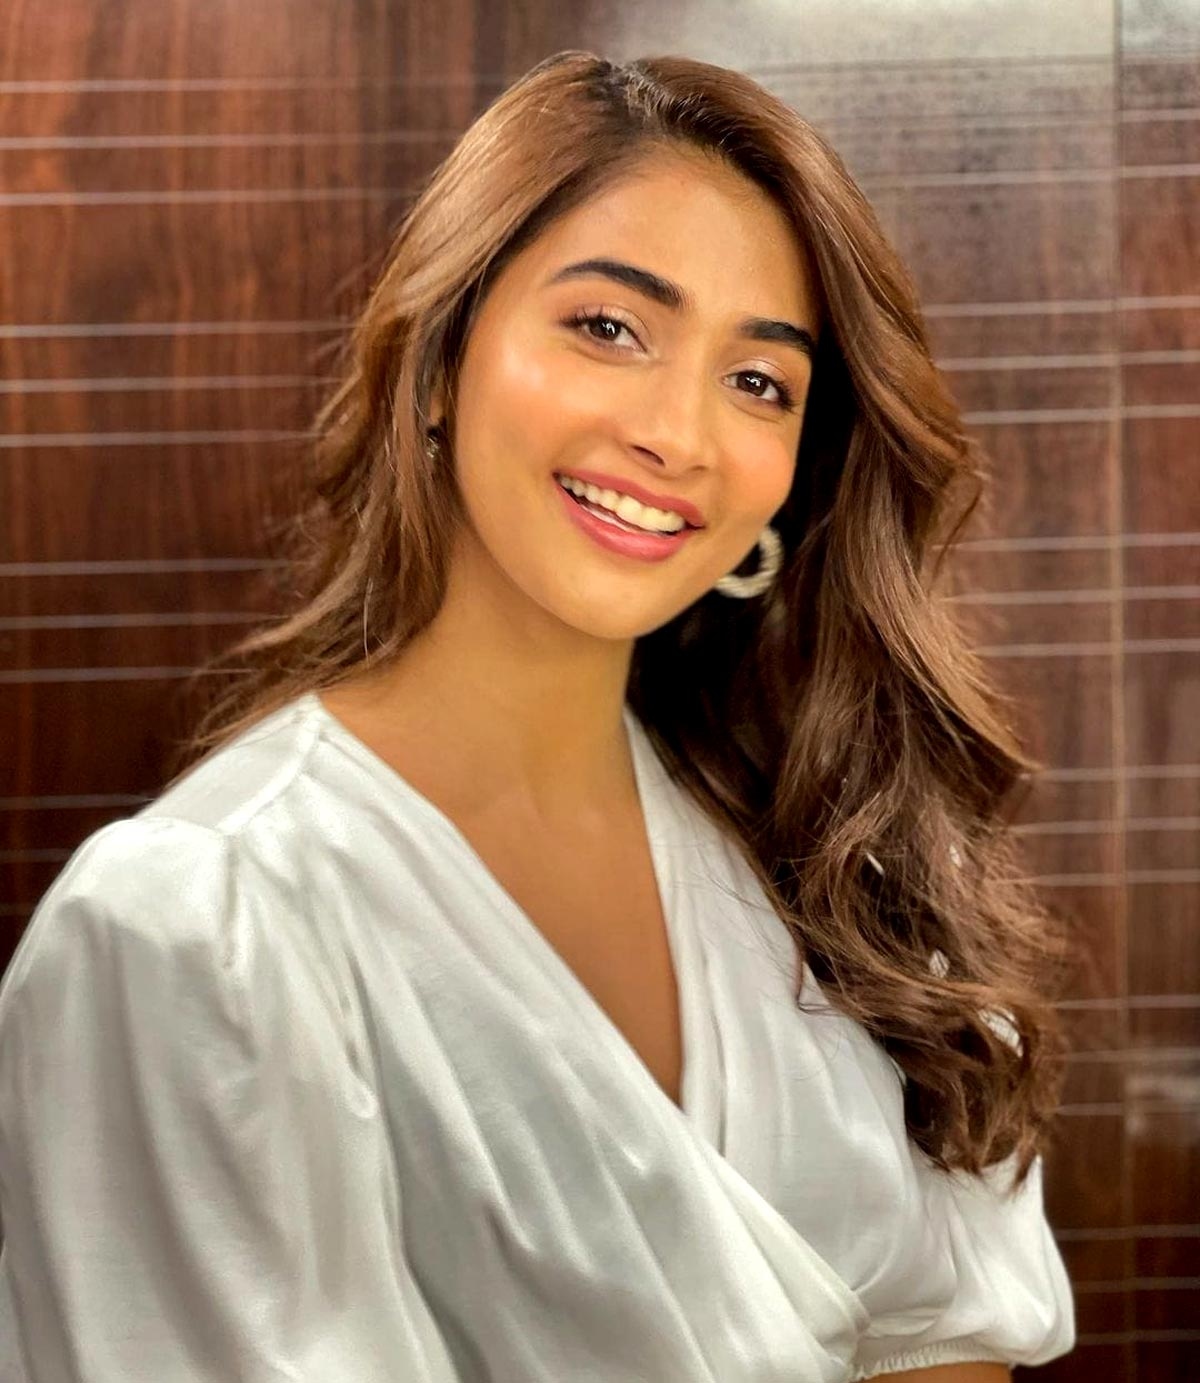 Pooja Hegde celebrates first anniversary of home ownership